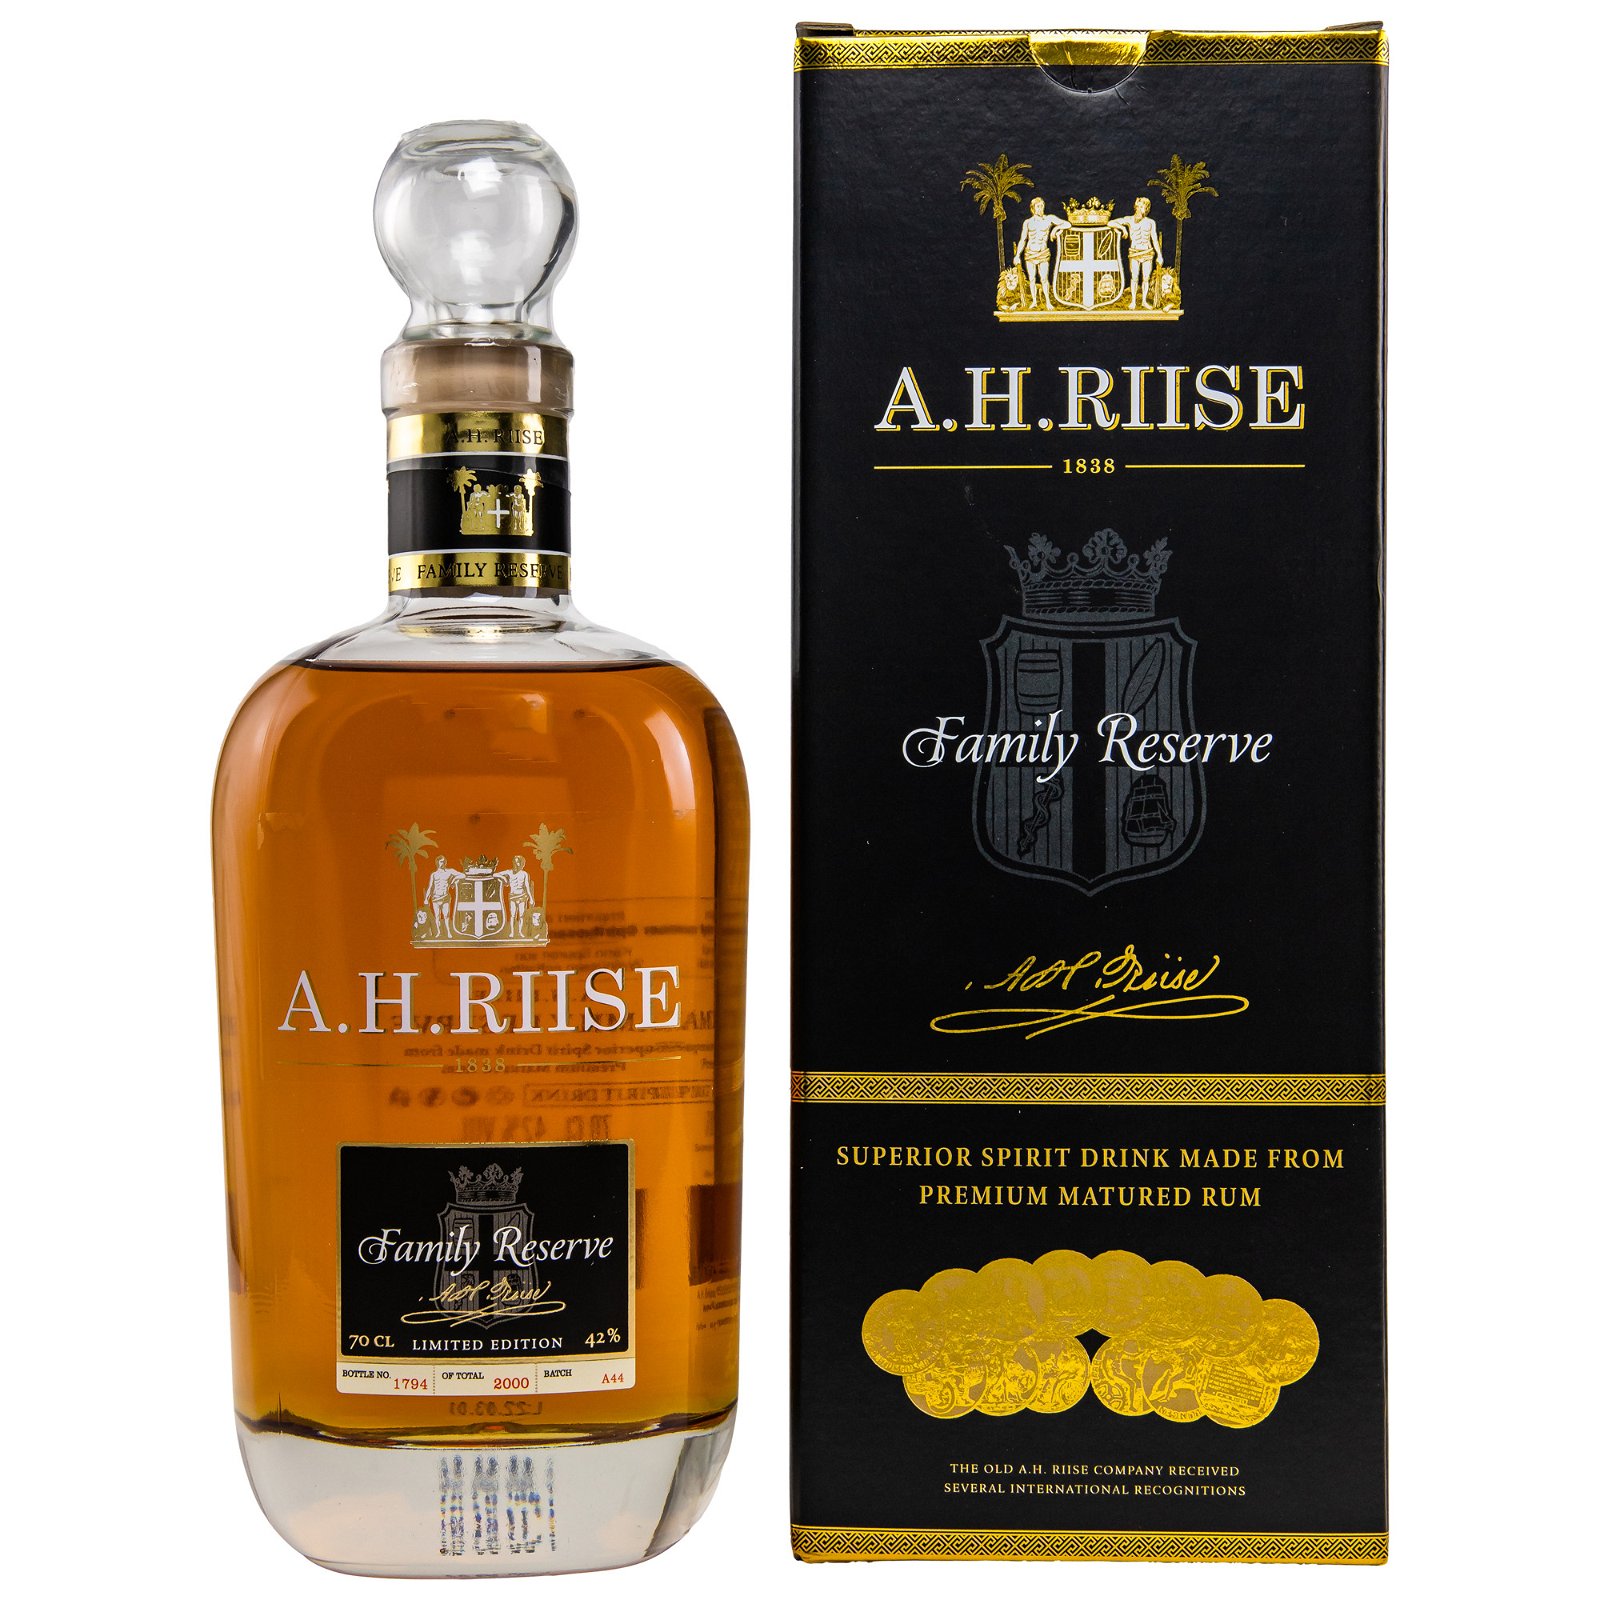 A.H. Riise Family Reserve 1838